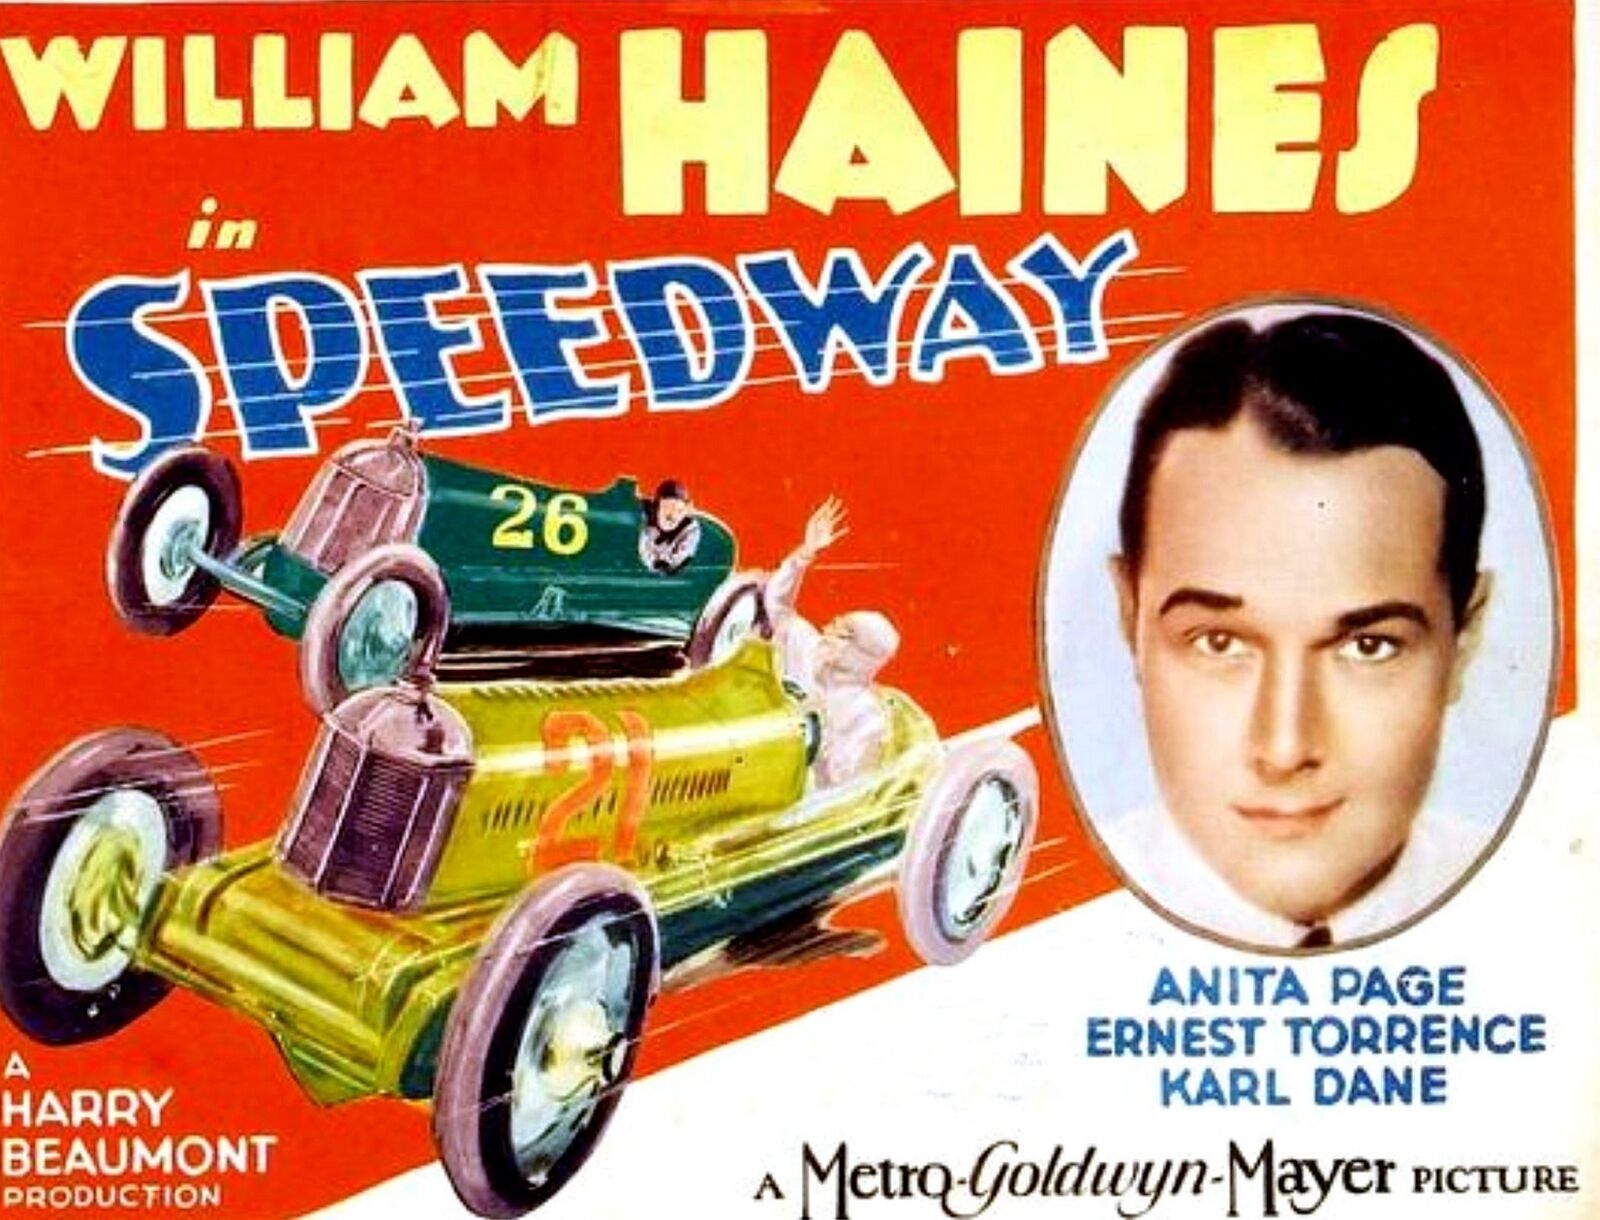 1929 WILLIAM HAINES in SPEEDWAY Mini Lobby Card PHOTO  (197-h )